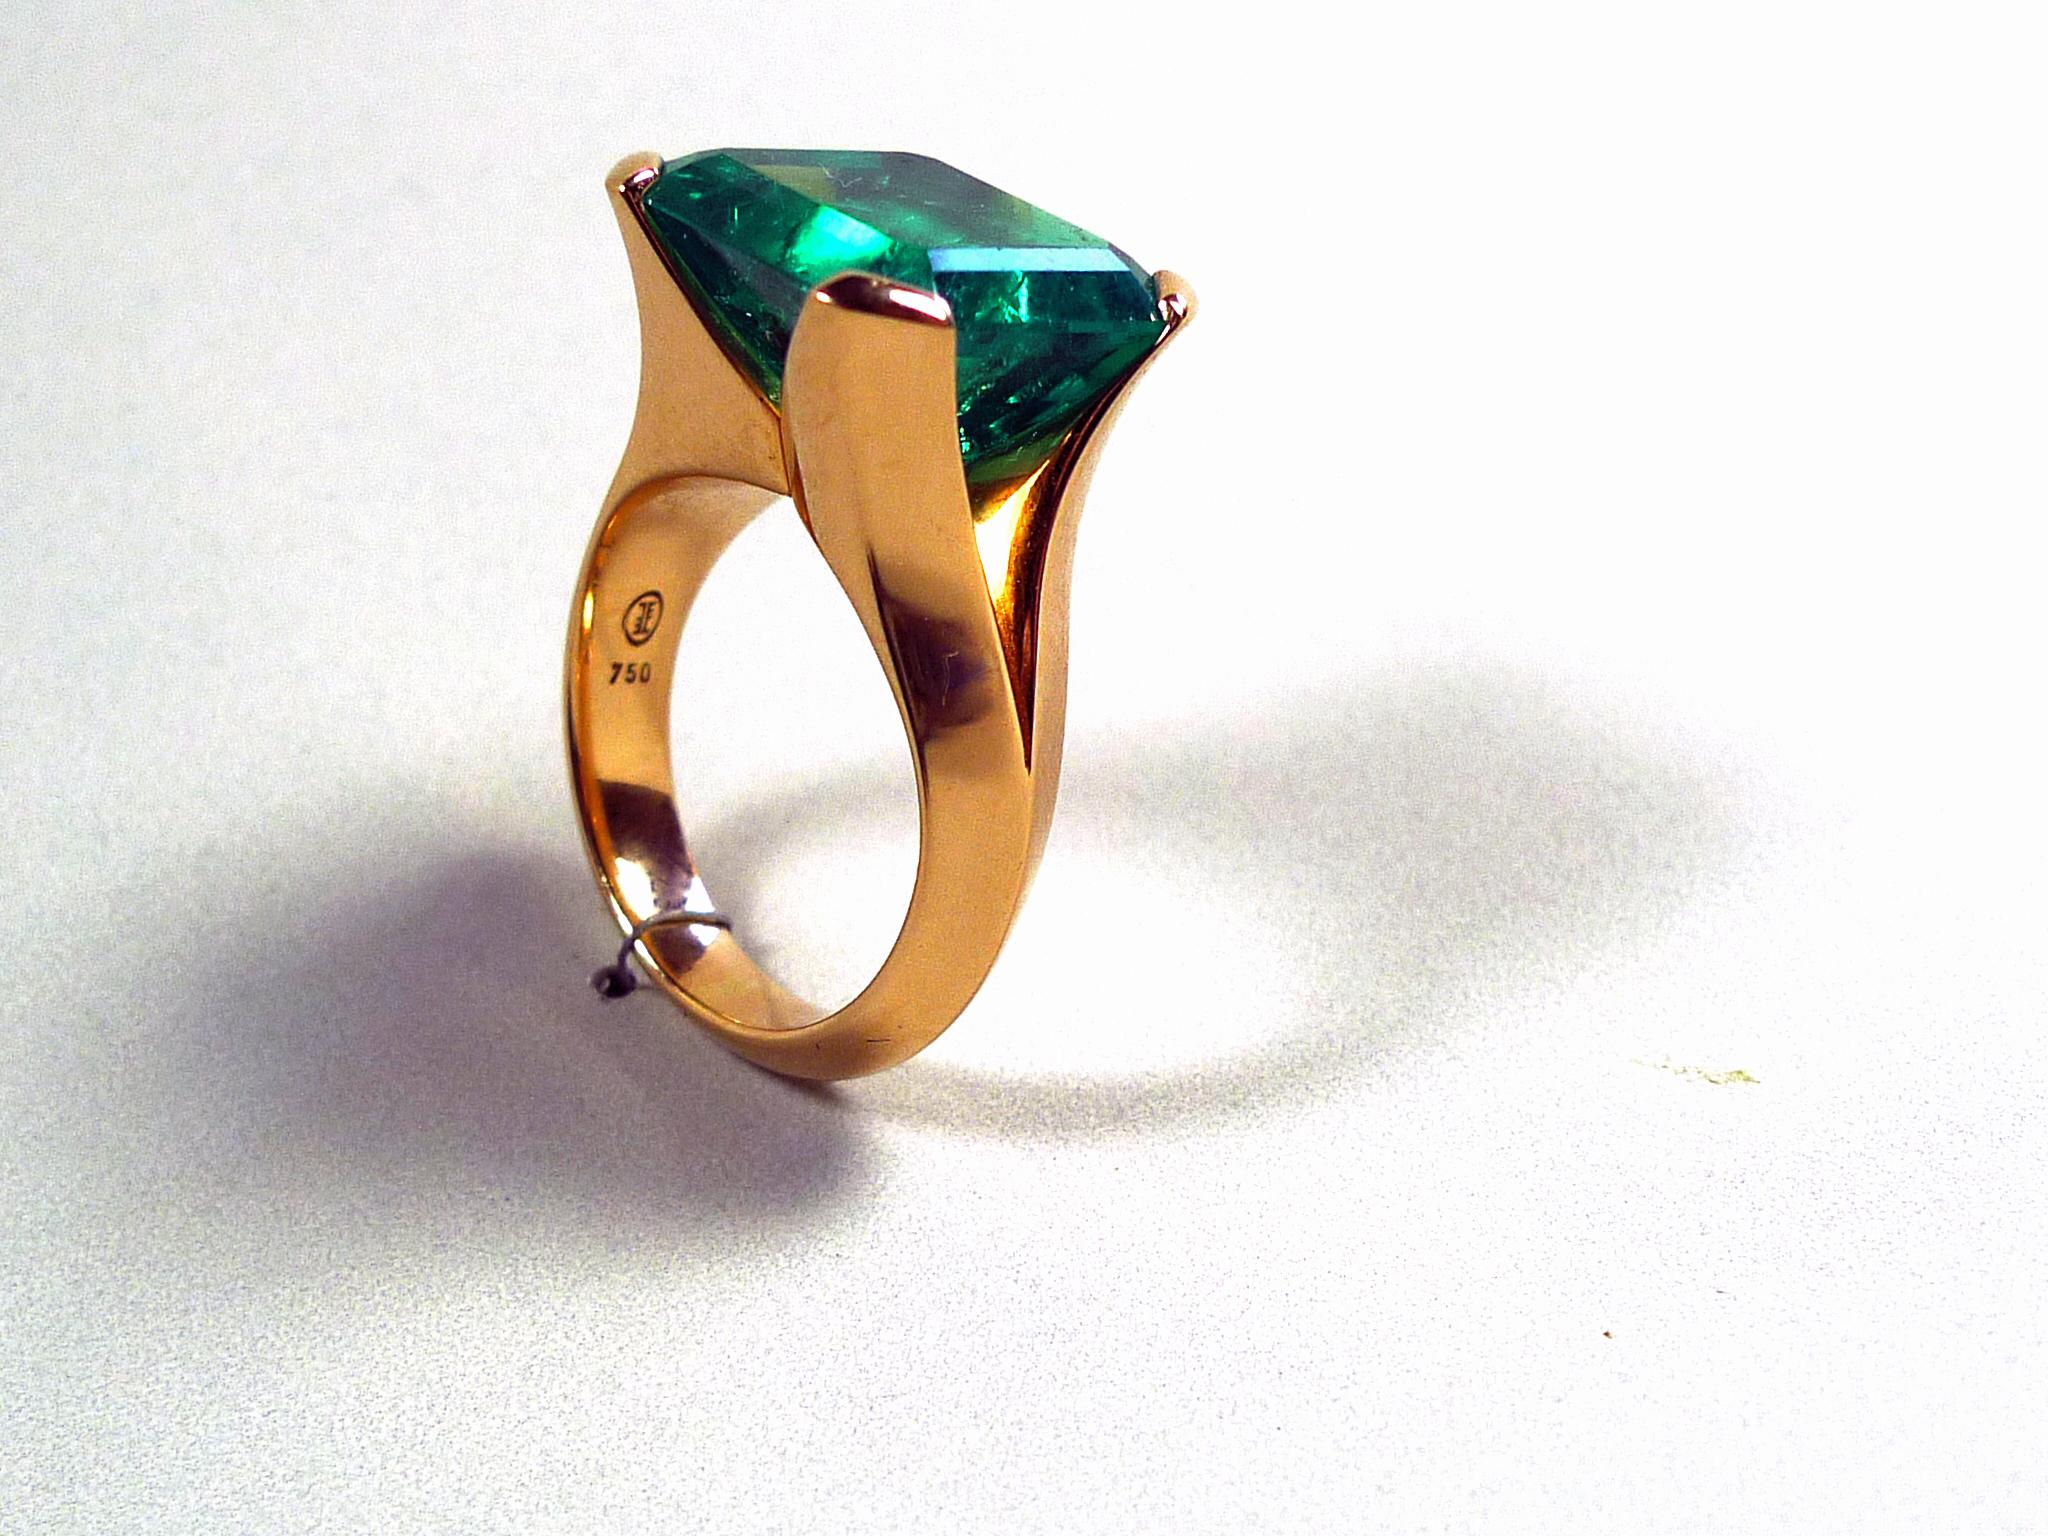 LOVE OVER GOLD is my name. Stunning Colombian emerald cocktail ring, handcrafted in solid 18 karat light rose gold with fluid like prongs. Showcasing a absolut high end class quality natural Colombian solitaire emerald of exceptional 12.27 carat,